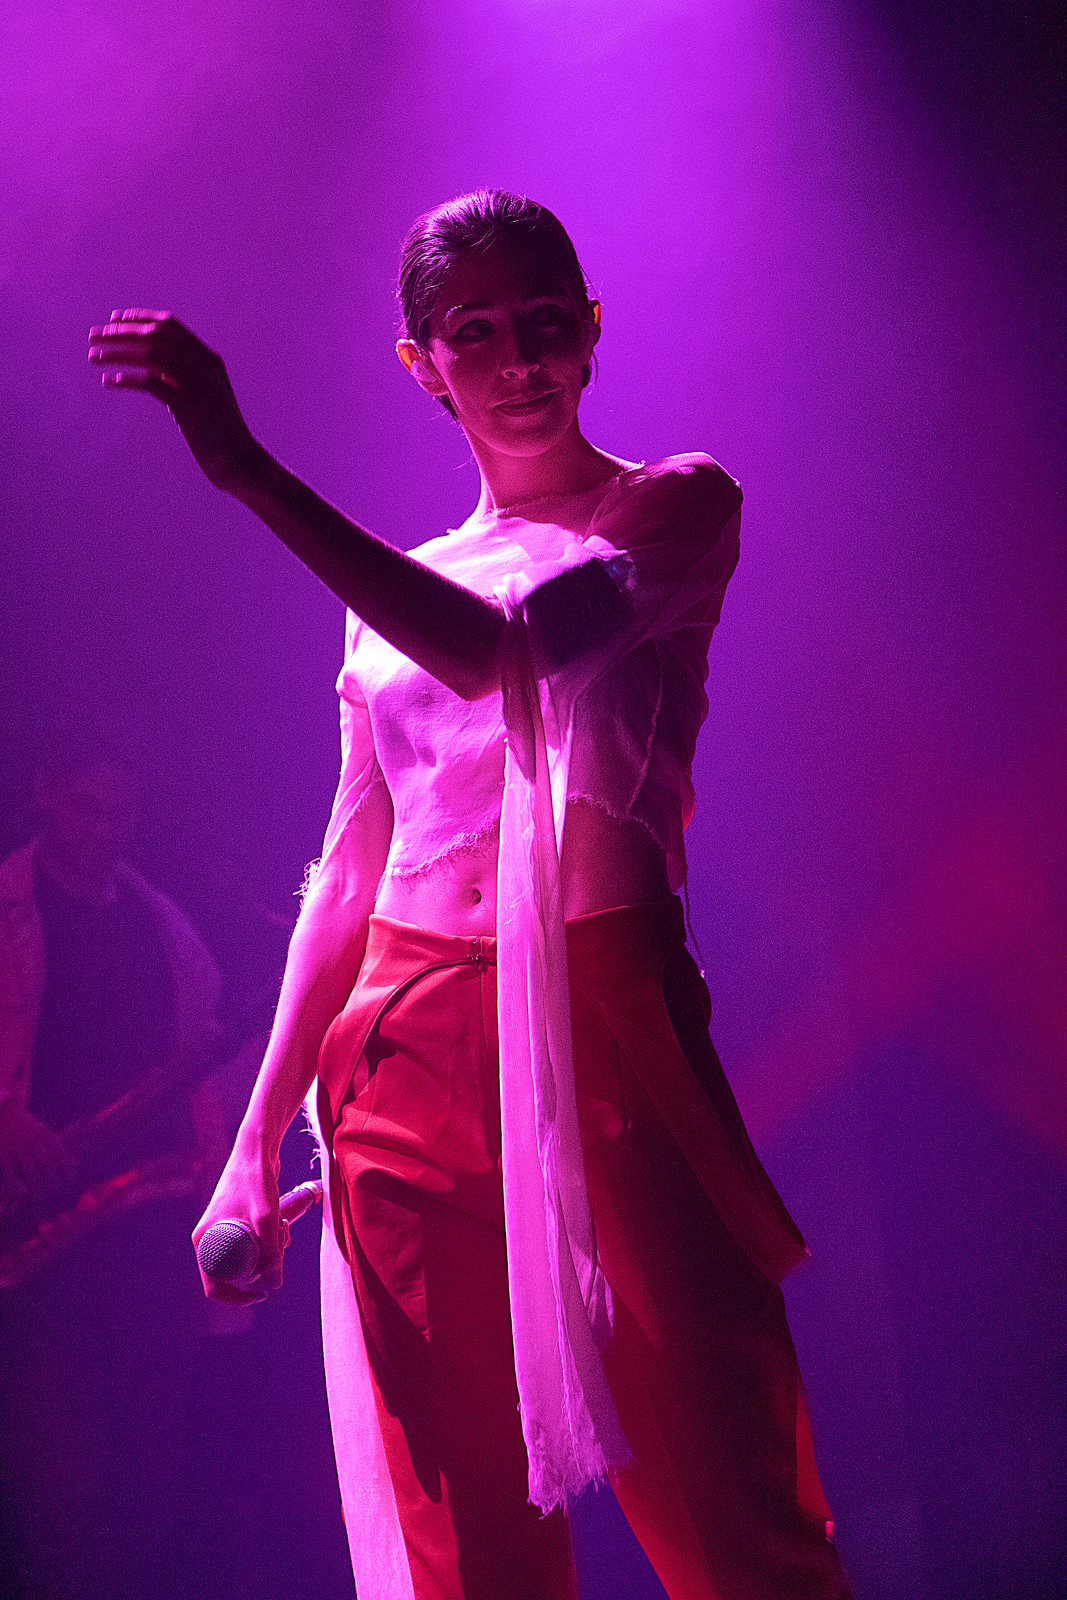 The band Chairlift - Concert photos from Denver